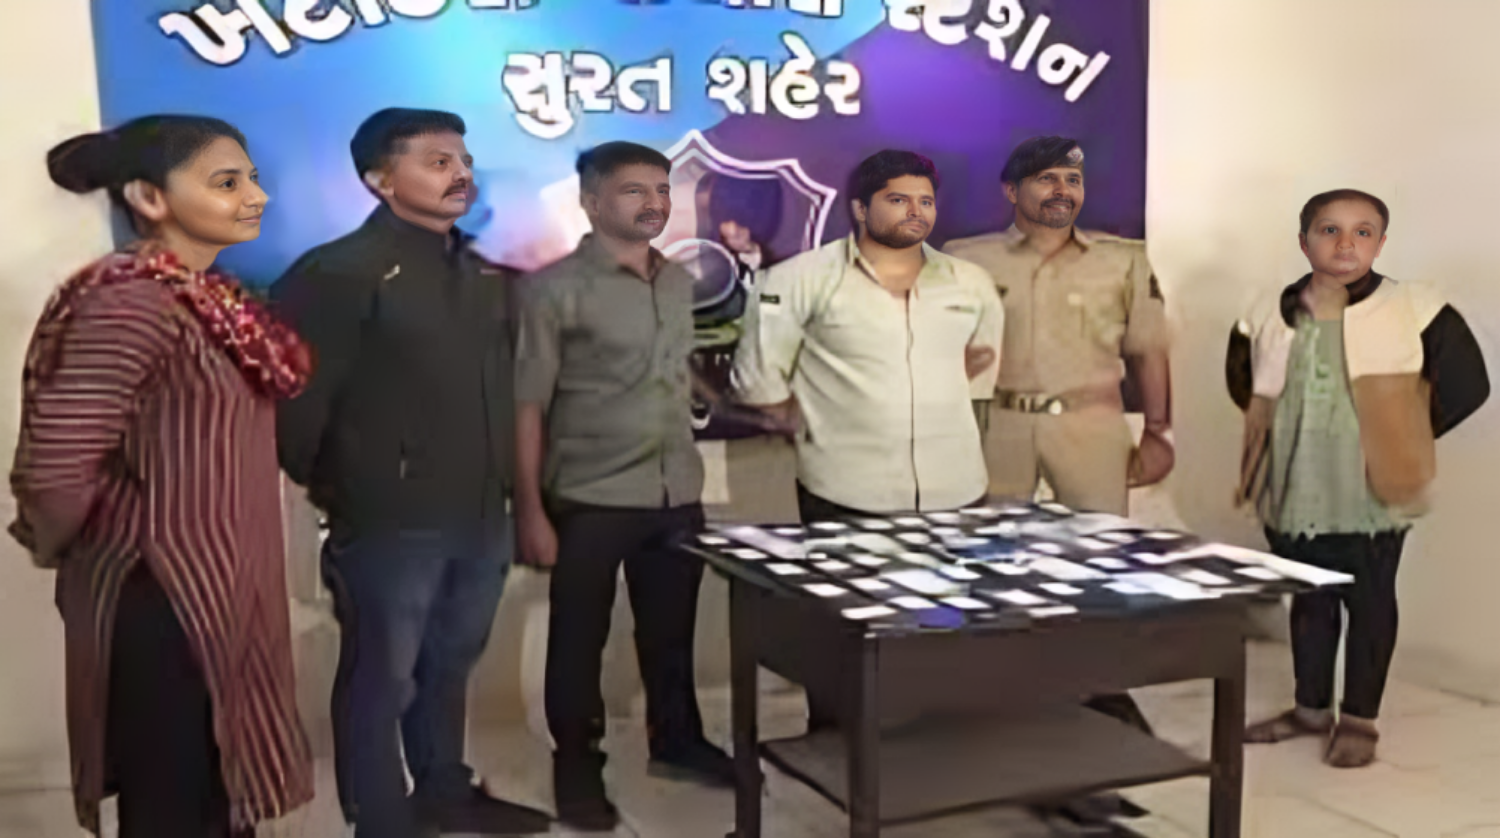 Picture of Surat: 54 mobile phones were seized from a person who was stealing in the guise of passengers, watch the video